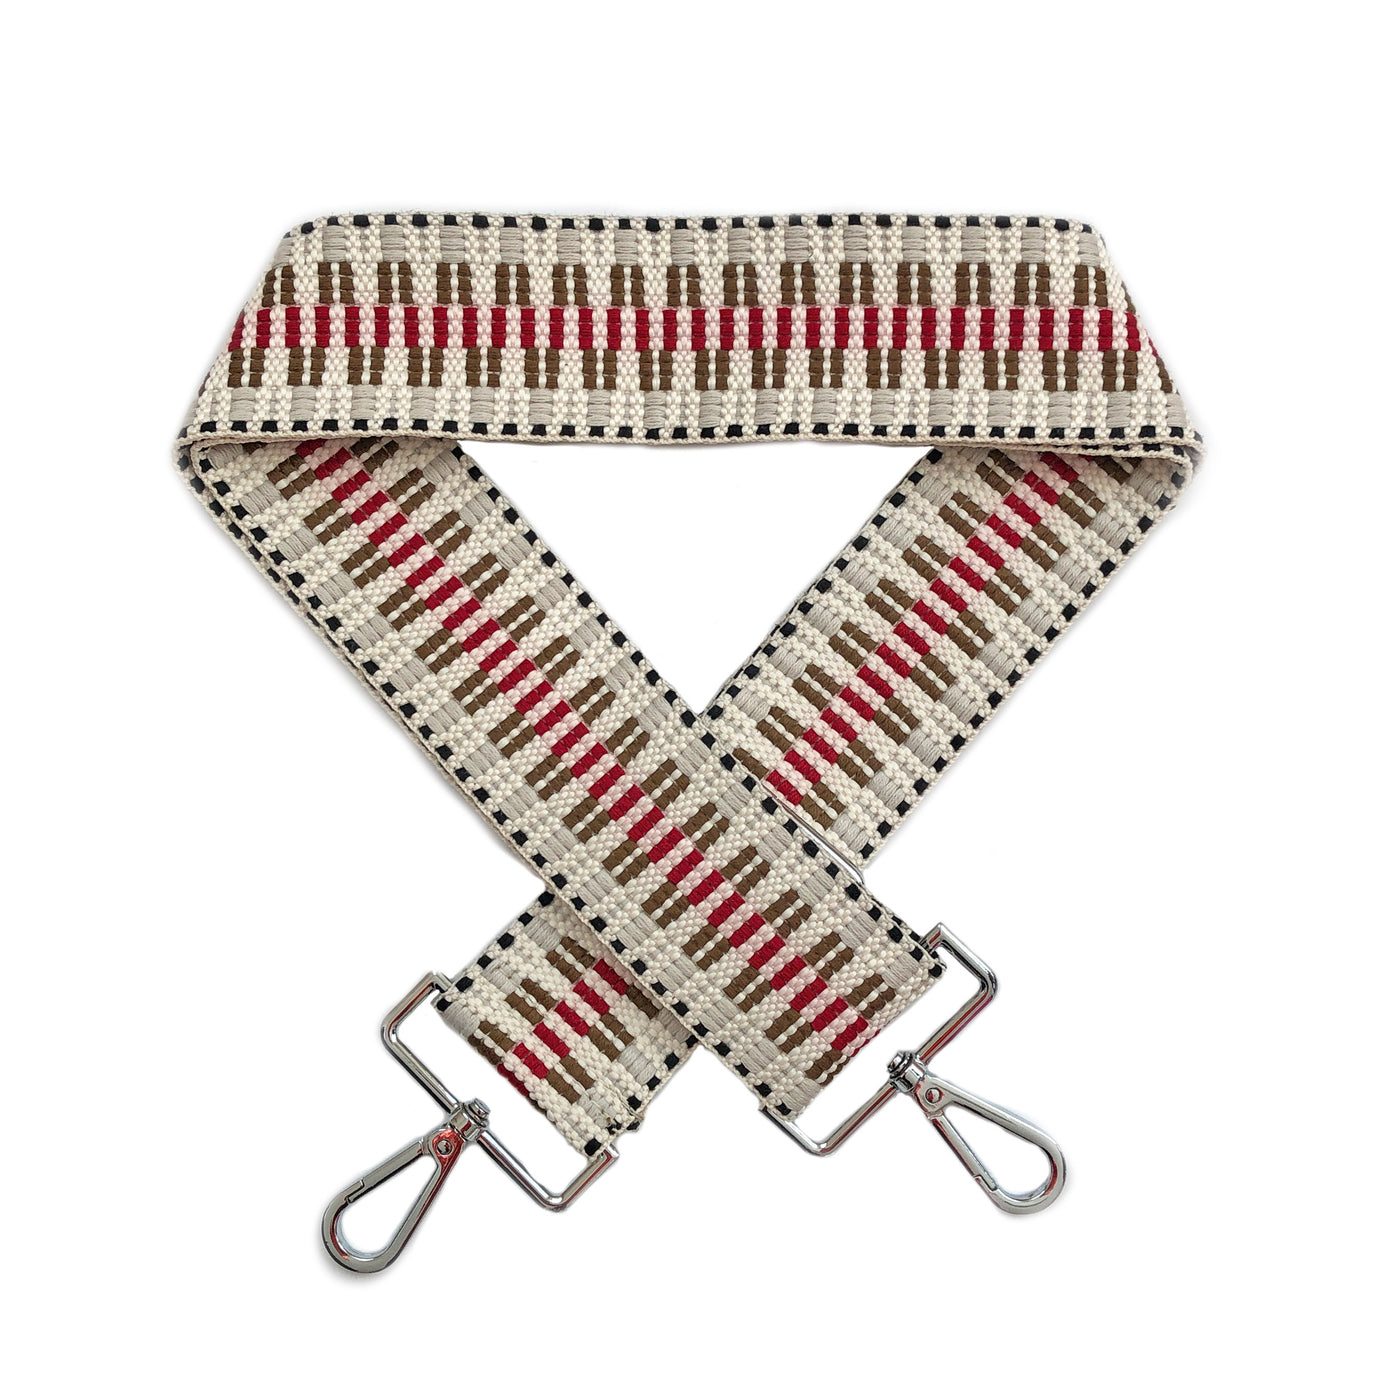 A beige, black, grey, maroon and brown geometric patterned woven bag strap with silver metal buckles, shown laying on a plain white background.